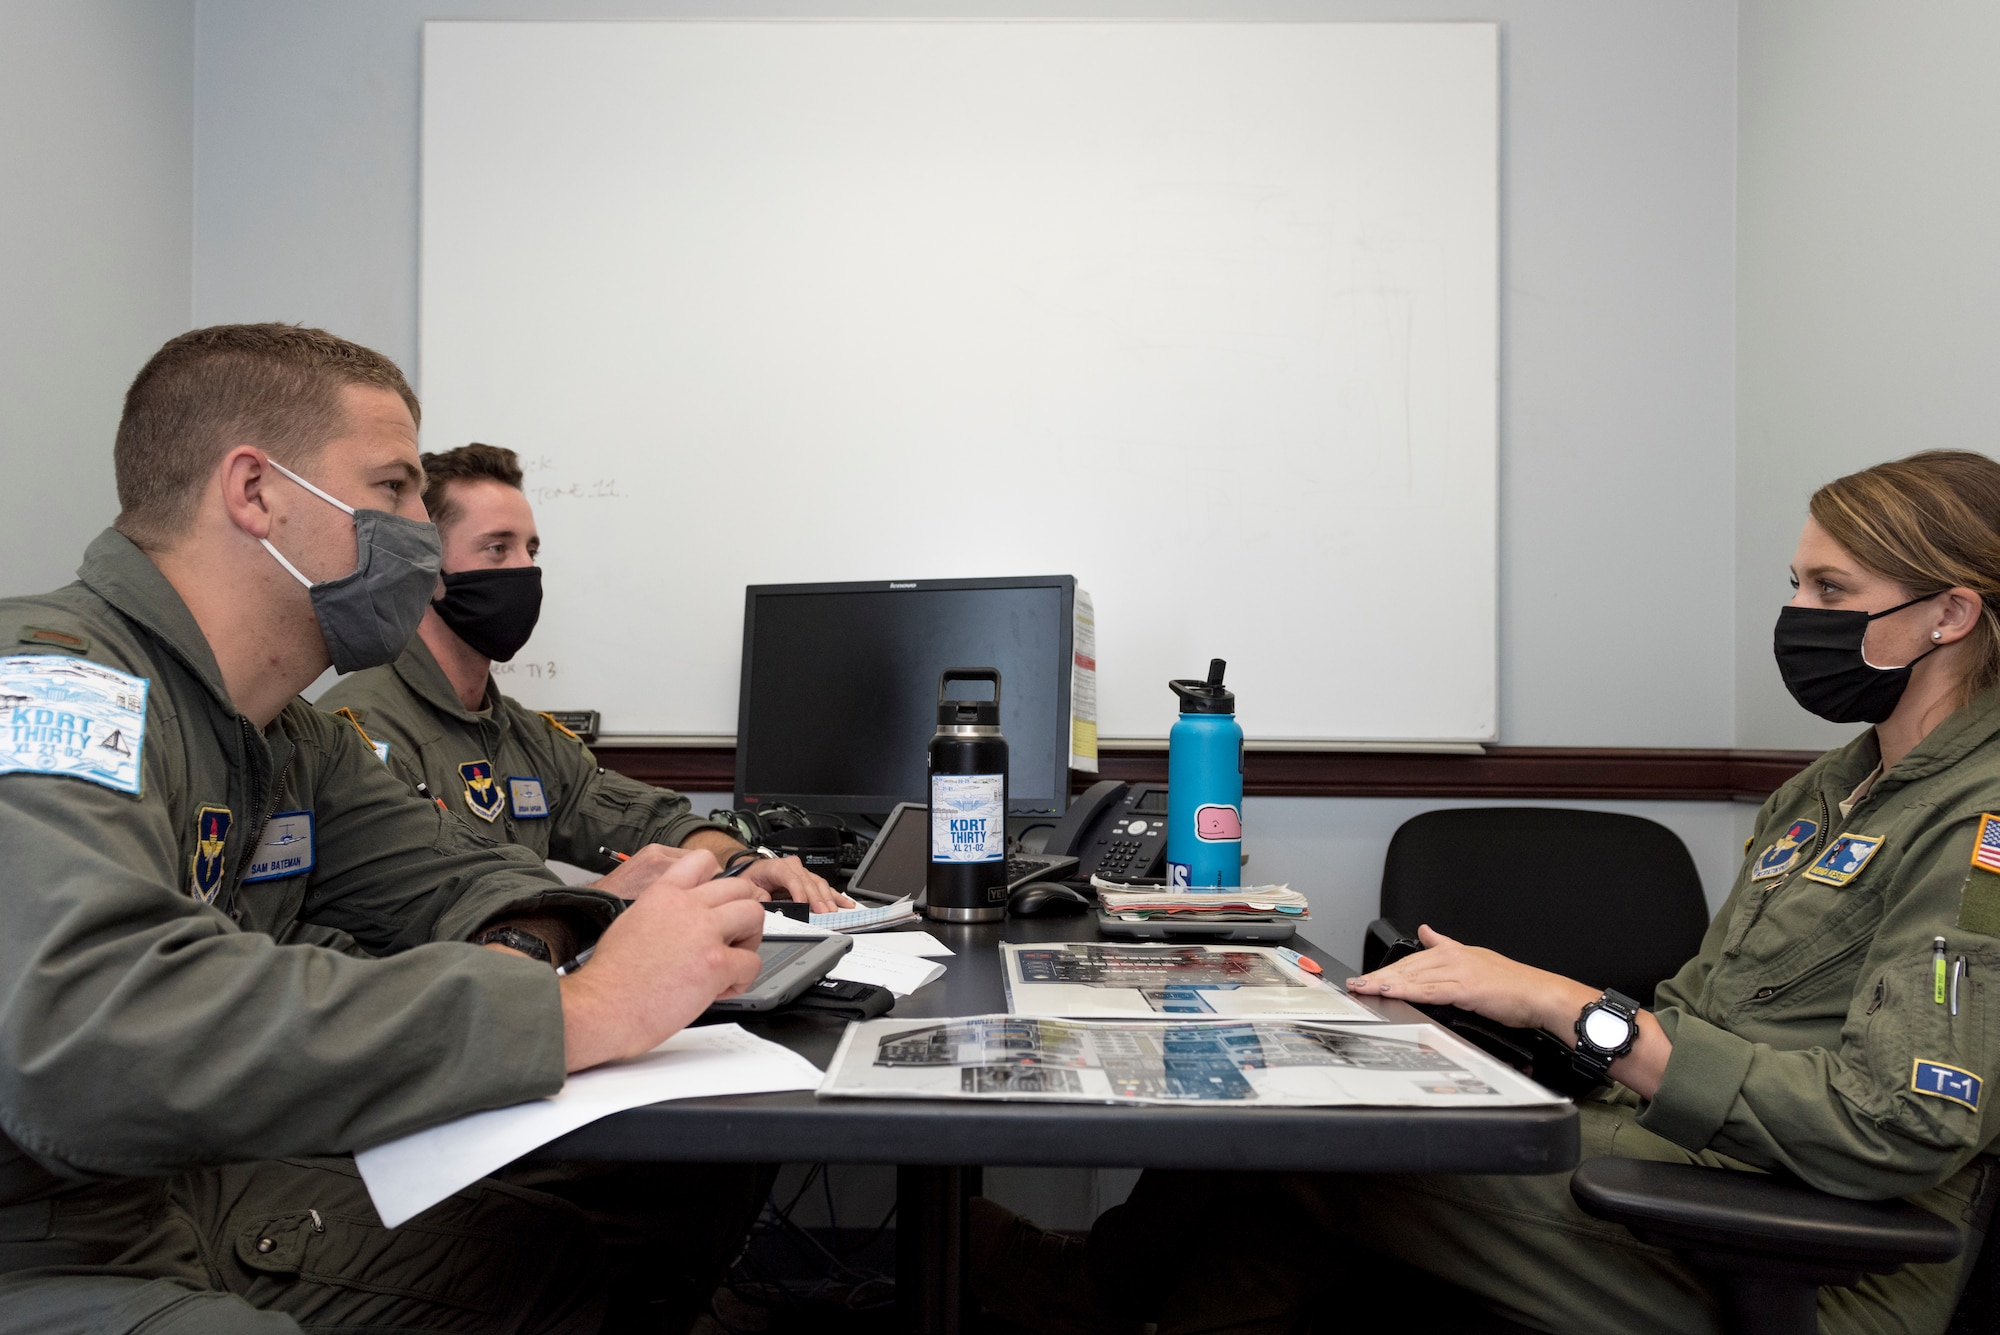 Capt. Monica Kestermann, 86th Flying Training Squadron instructor pilot leads 2nd Lieutenants Sam Bateman and Josiah Apgar in a pre-flight brief, Aug. 11, 2020 at Laughlin Air Force Base, Texas. Kestermann says the women she flies with share endless experiences and are invaluable resources about anything from flying to career advice to balancing family and work. For her, it’s wonderful to have a group like the Female Aviators’ Mentorship Group at Laughlin to rely on. (U.S. Air Force photo by Senior Airman Anne McCready)